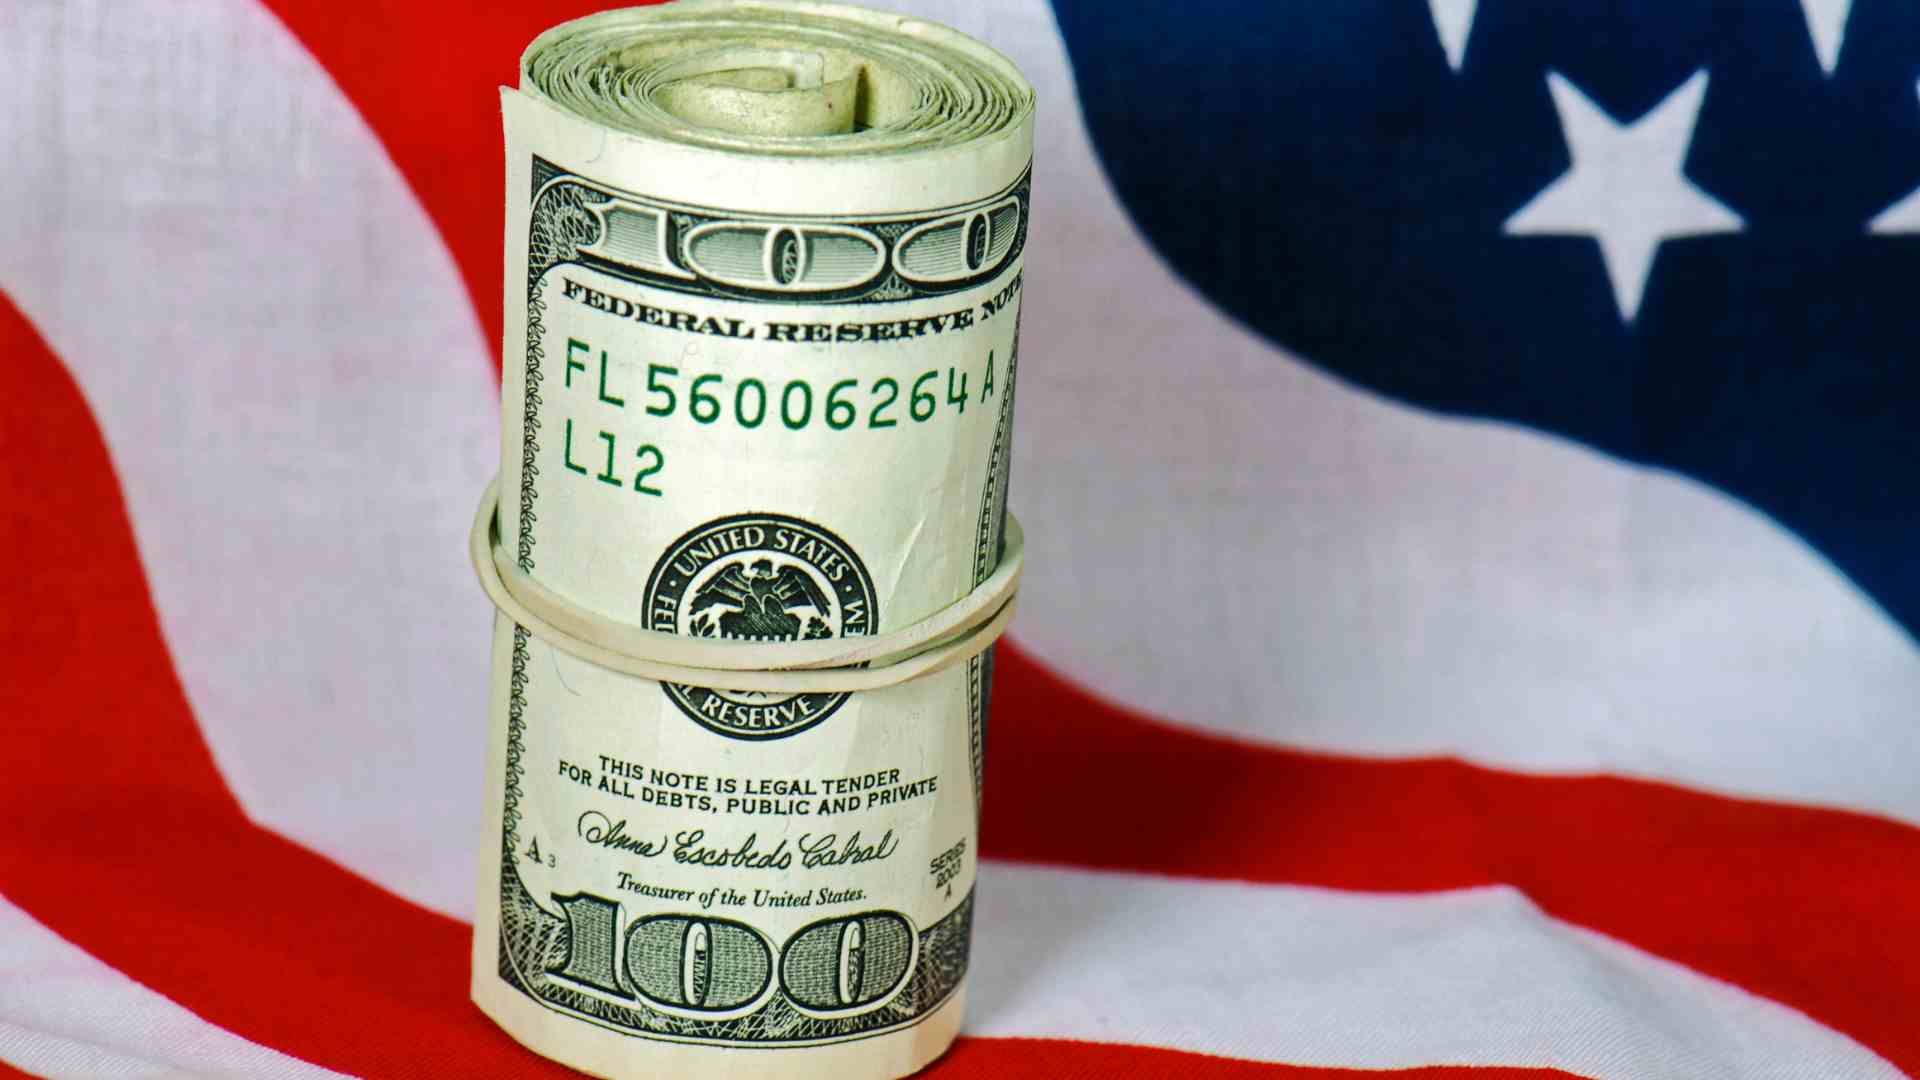 Dollars and US flag for Stimulus checks in the United States, some payments will be due in just a few days